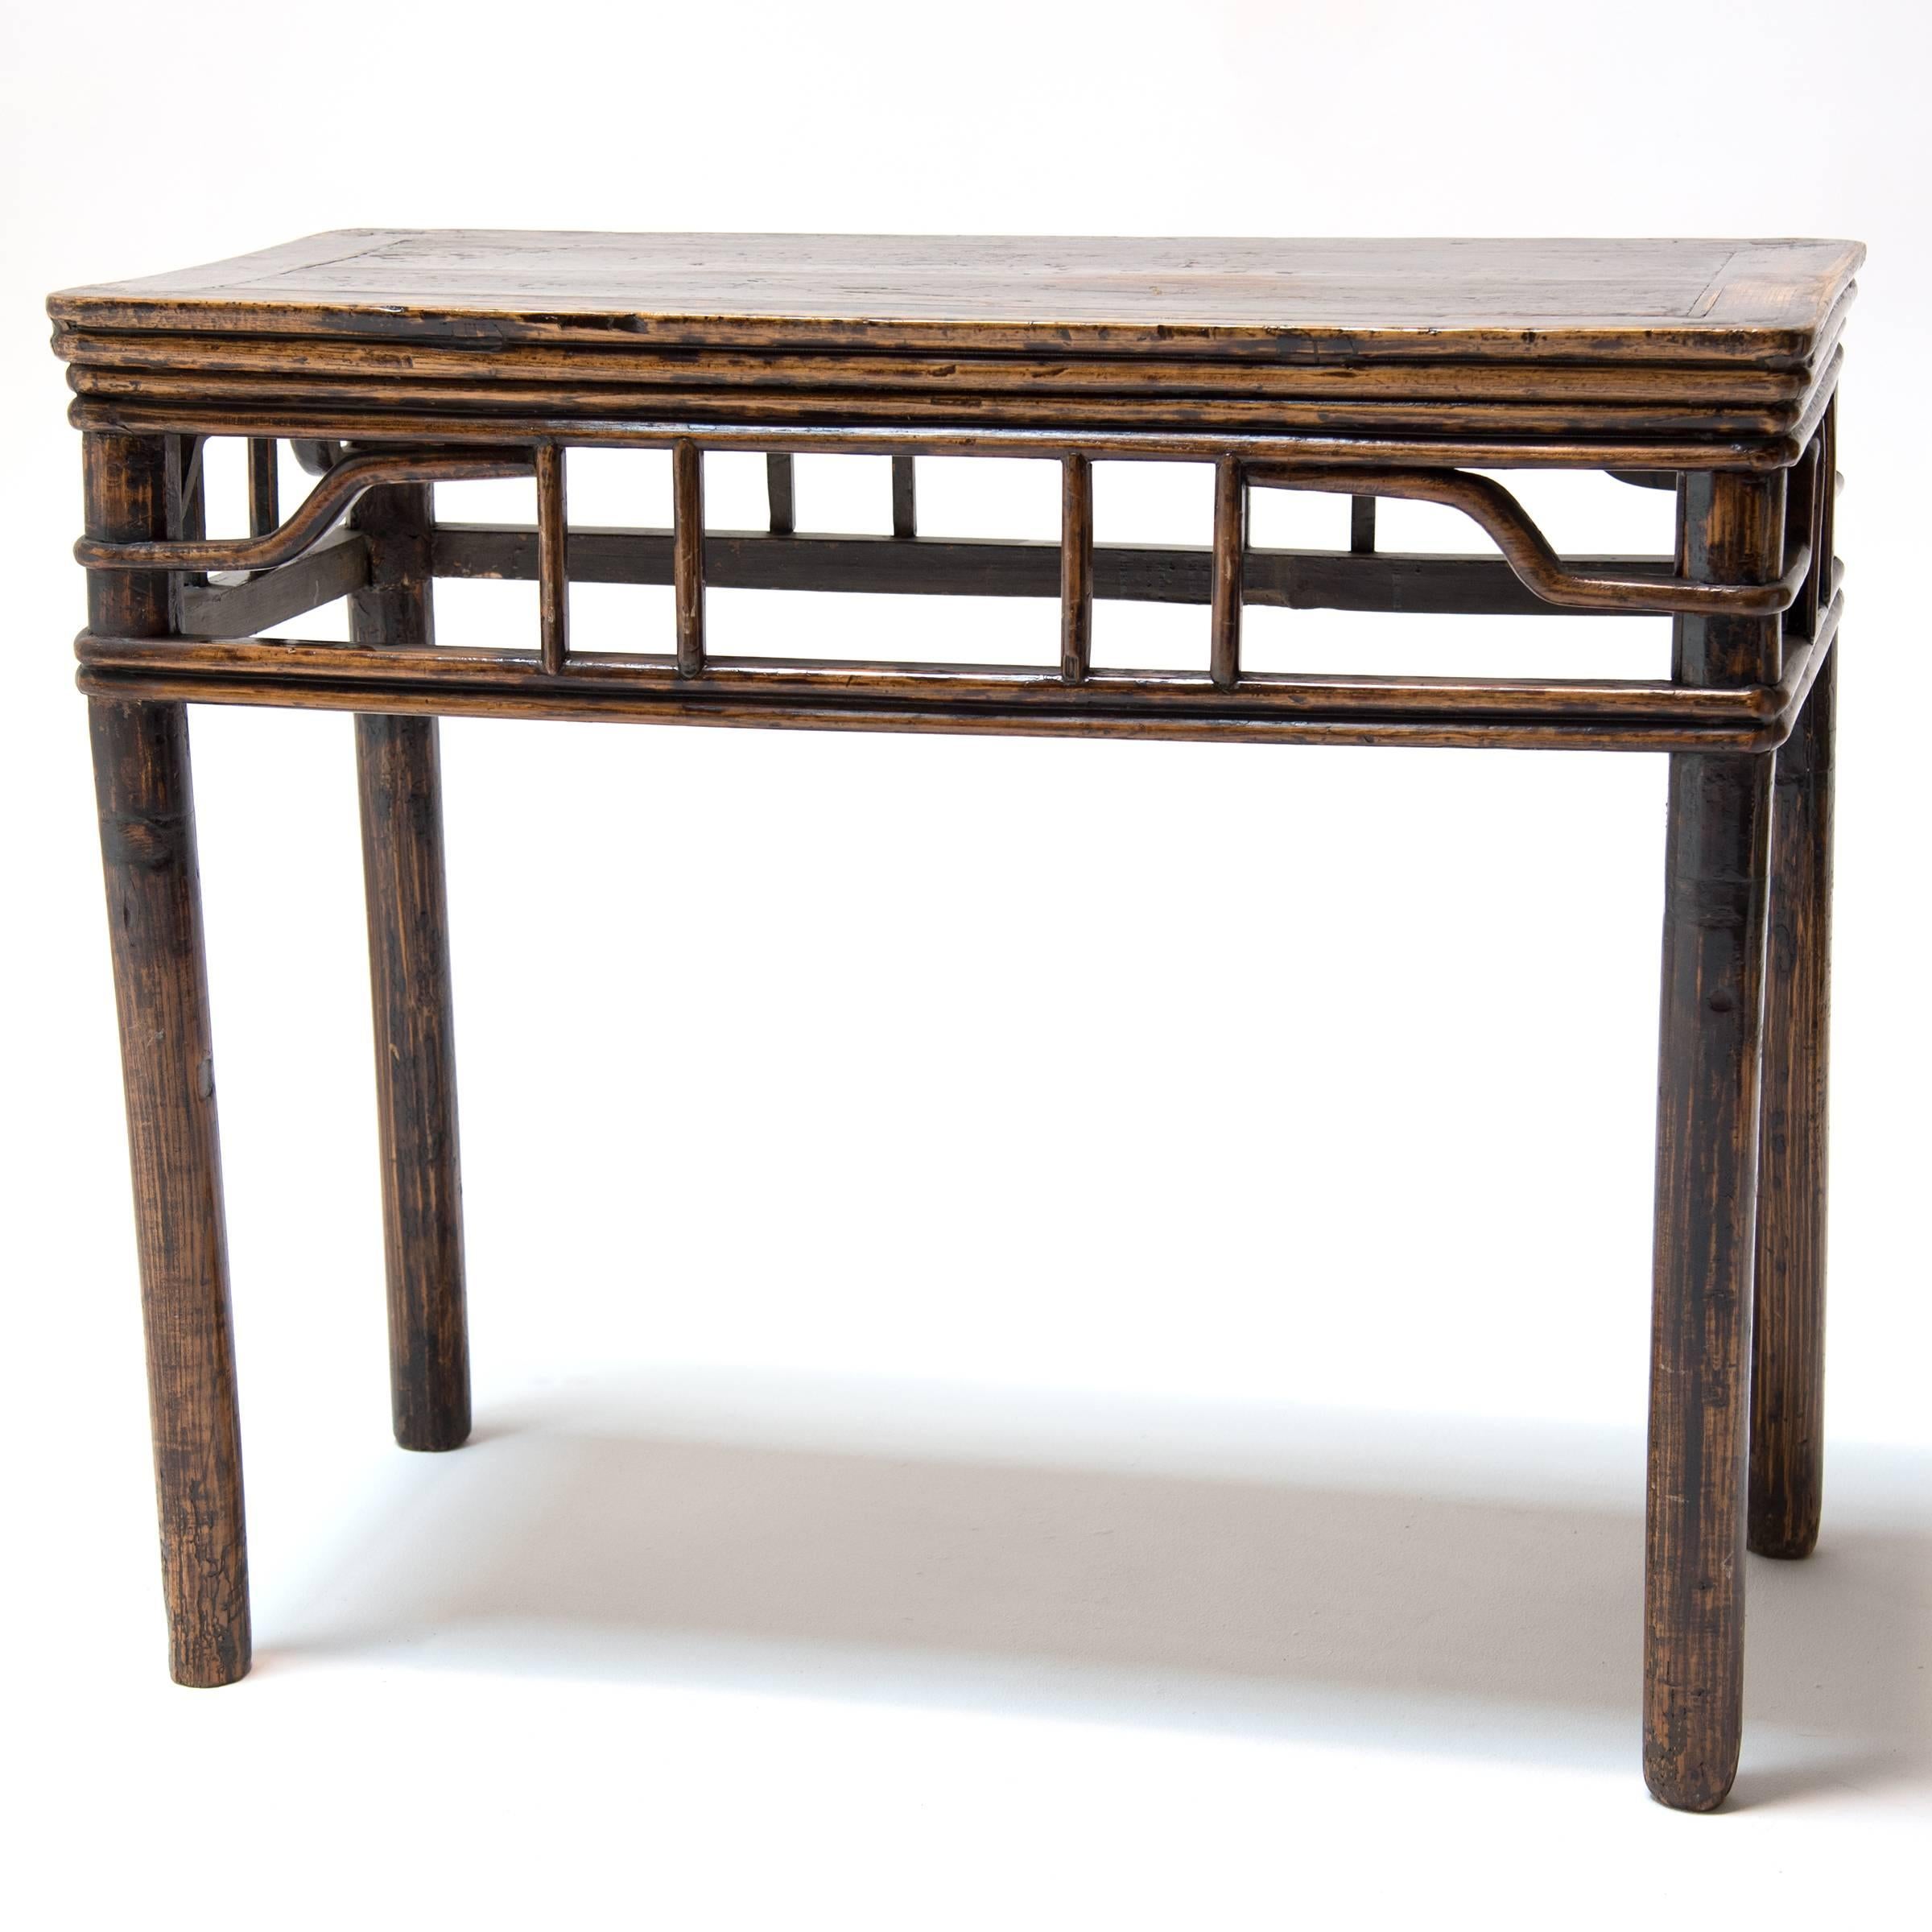 Qing Chinese Half Table with Lattice Apron, c. 1850